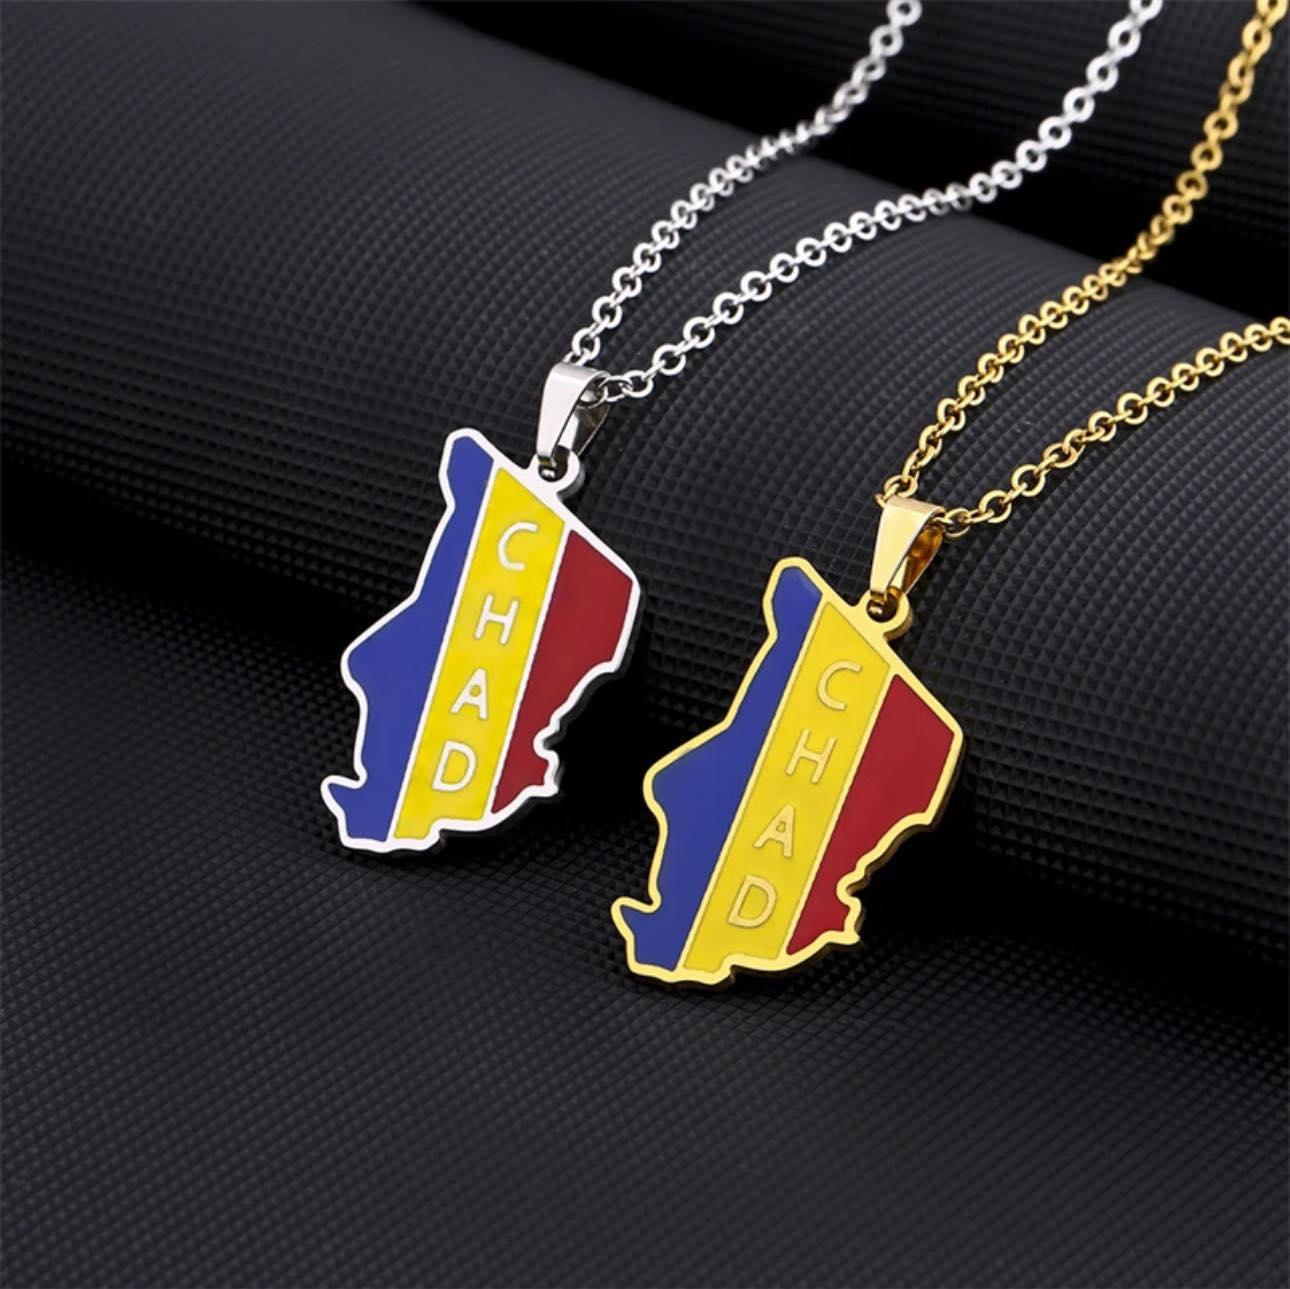 Chad Flag Necklace